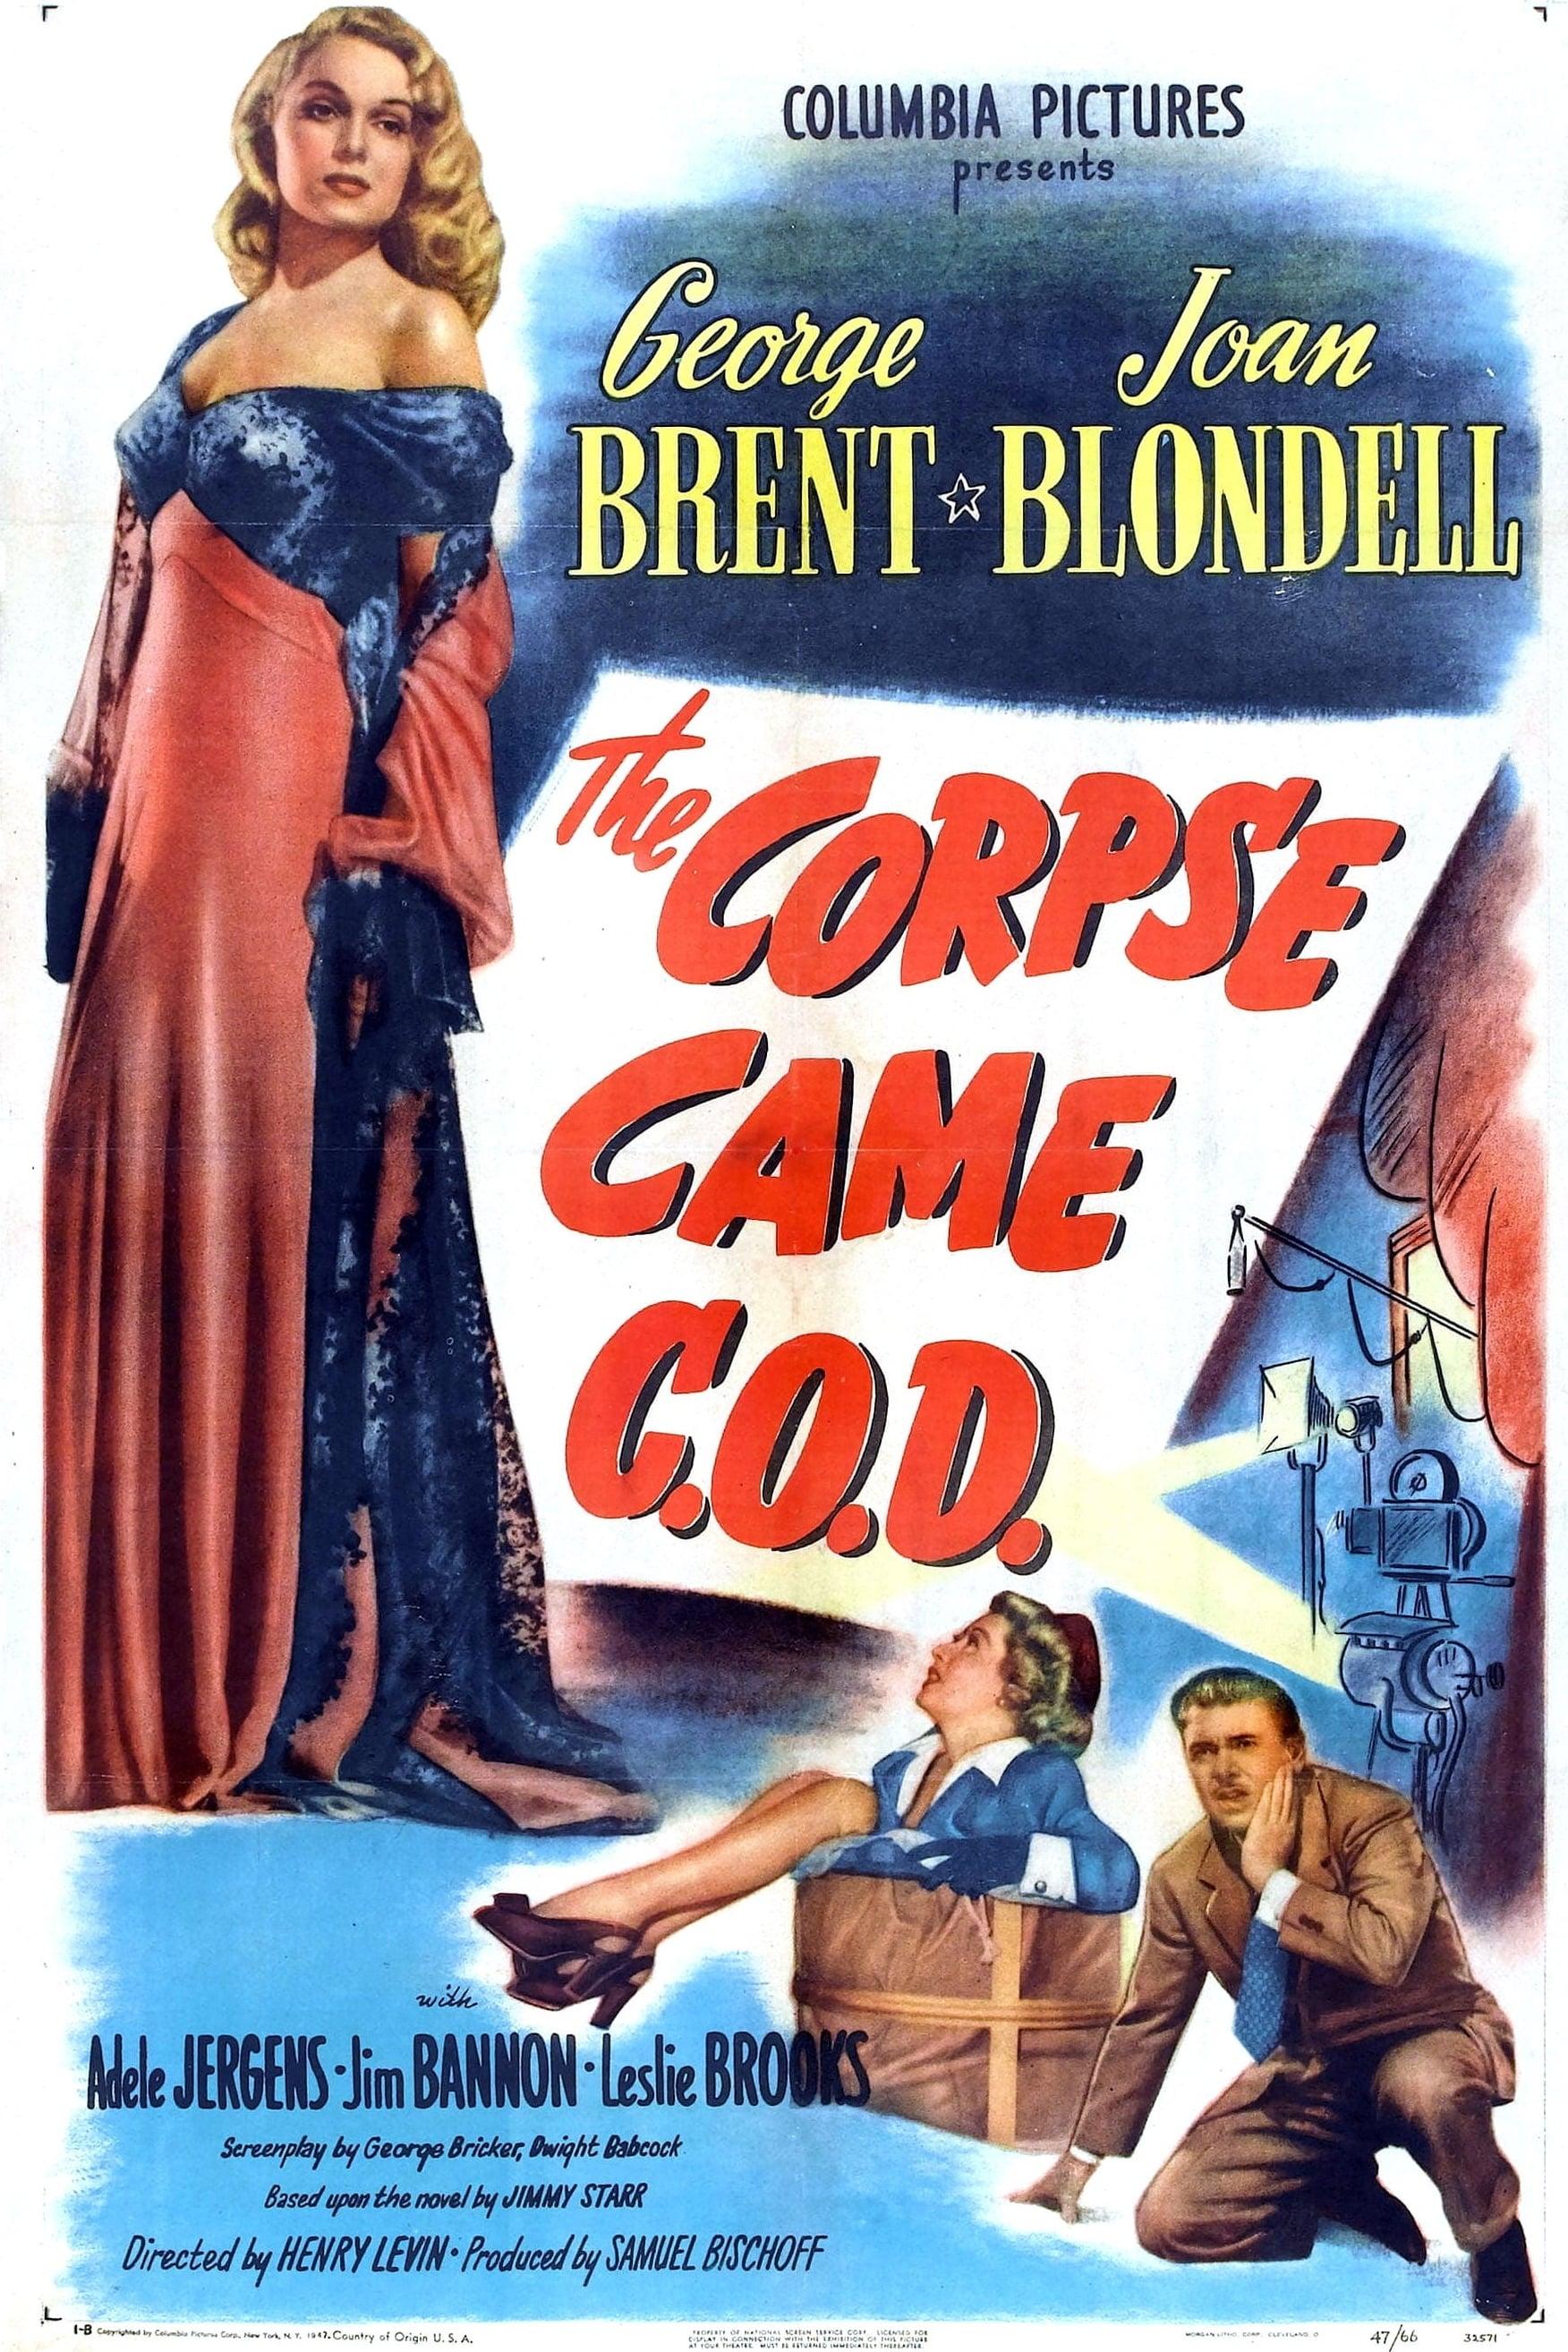 The Corpse Came C.O.D. poster